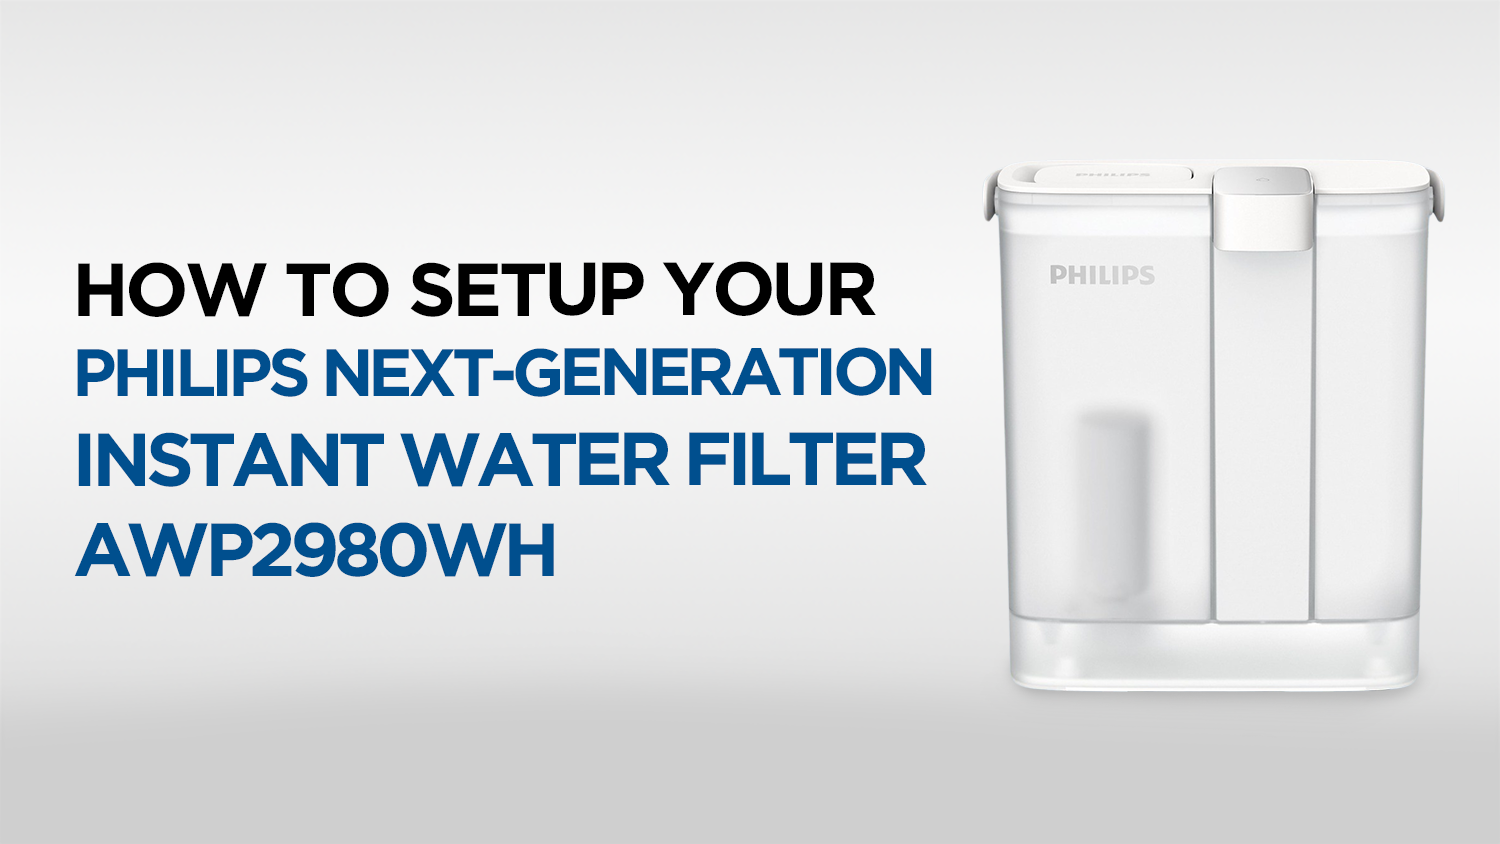 How to Set Up Your Philips Next-generation instant water filter AWP2980WH